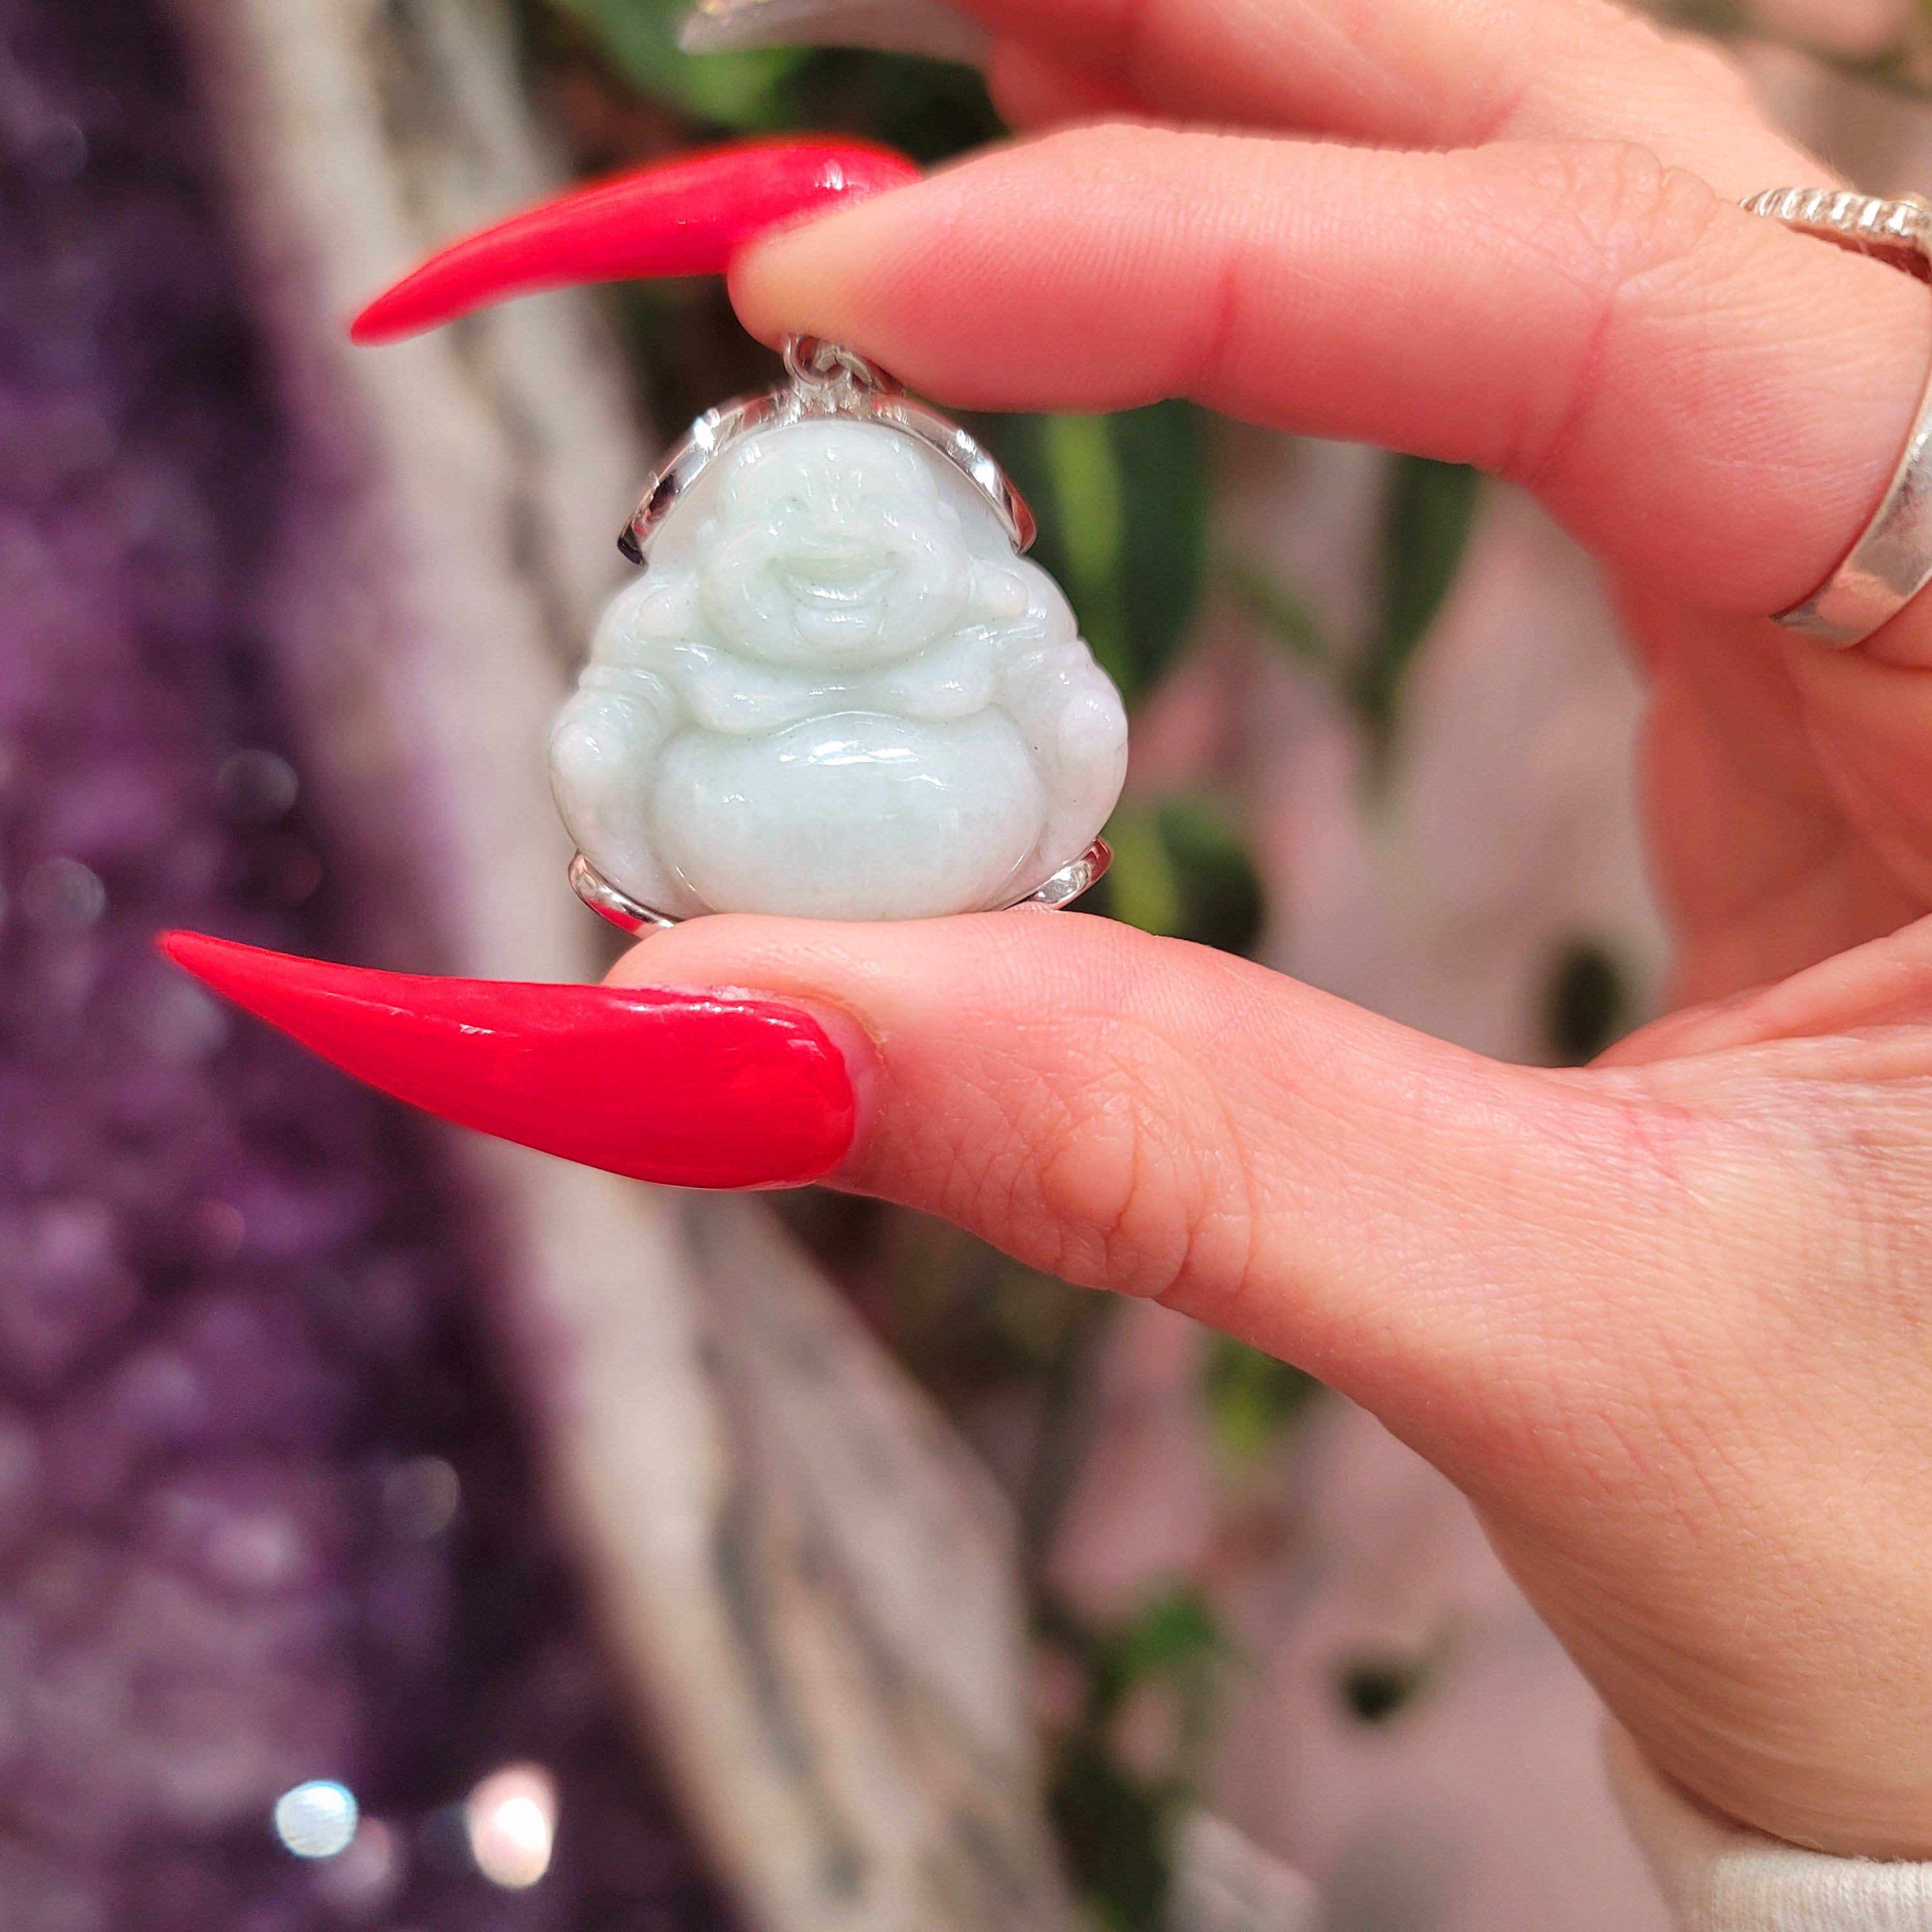 Jade Laughing Buddha Pendant for Good Luck, Prosperity and Serenity